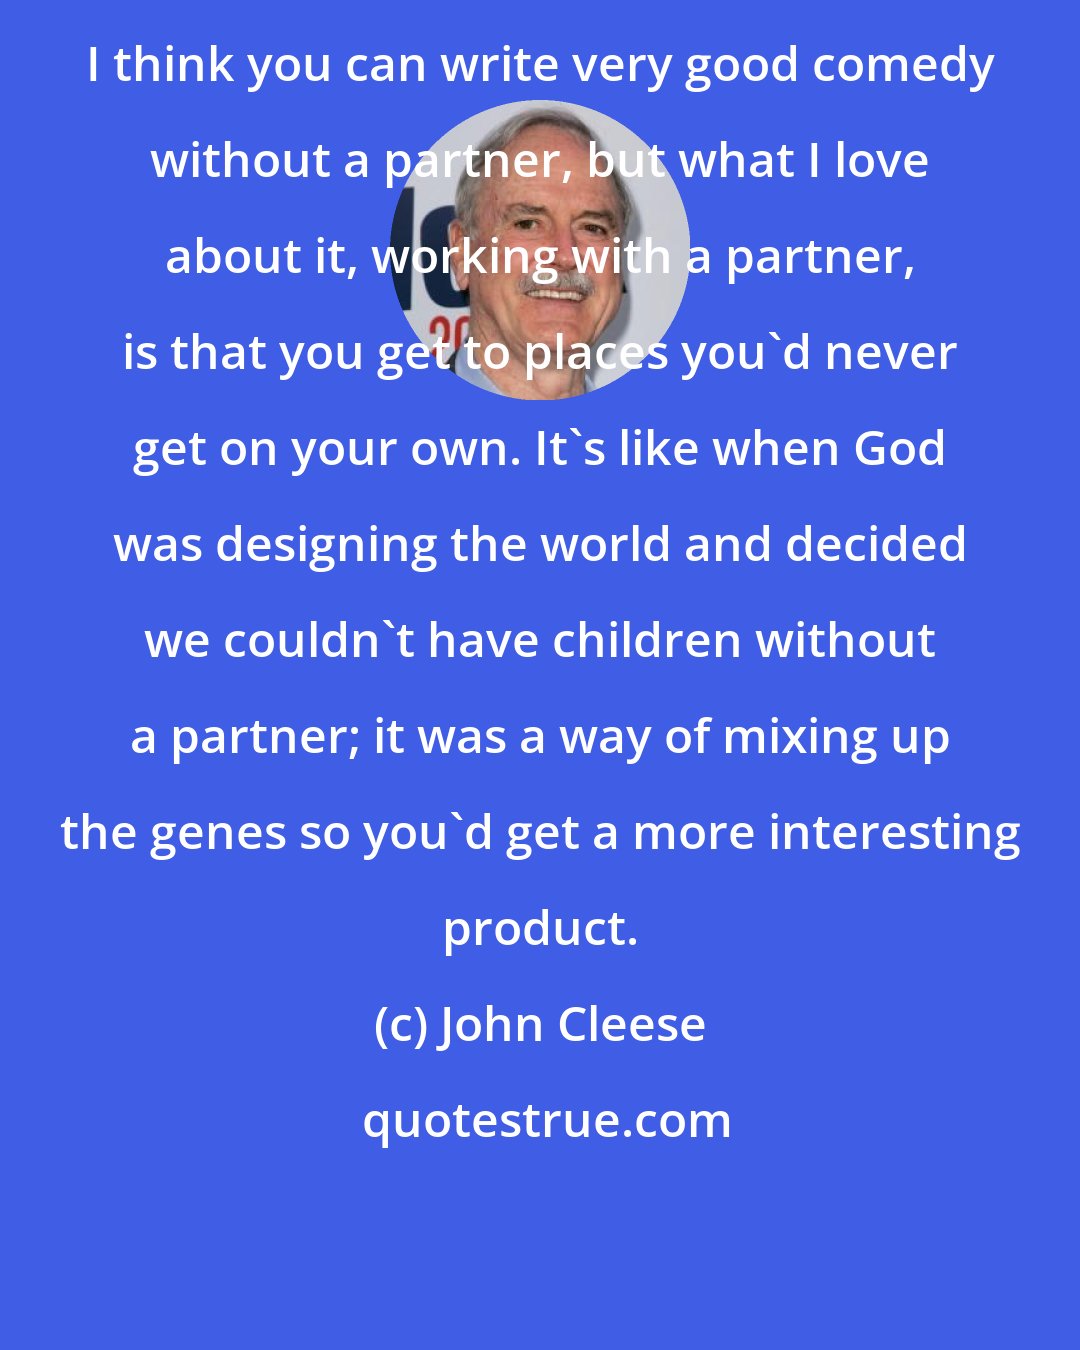 John Cleese: I think you can write very good comedy without a partner, but what I love about it, working with a partner, is that you get to places you'd never get on your own. It's like when God was designing the world and decided we couldn't have children without a partner; it was a way of mixing up the genes so you'd get a more interesting product.